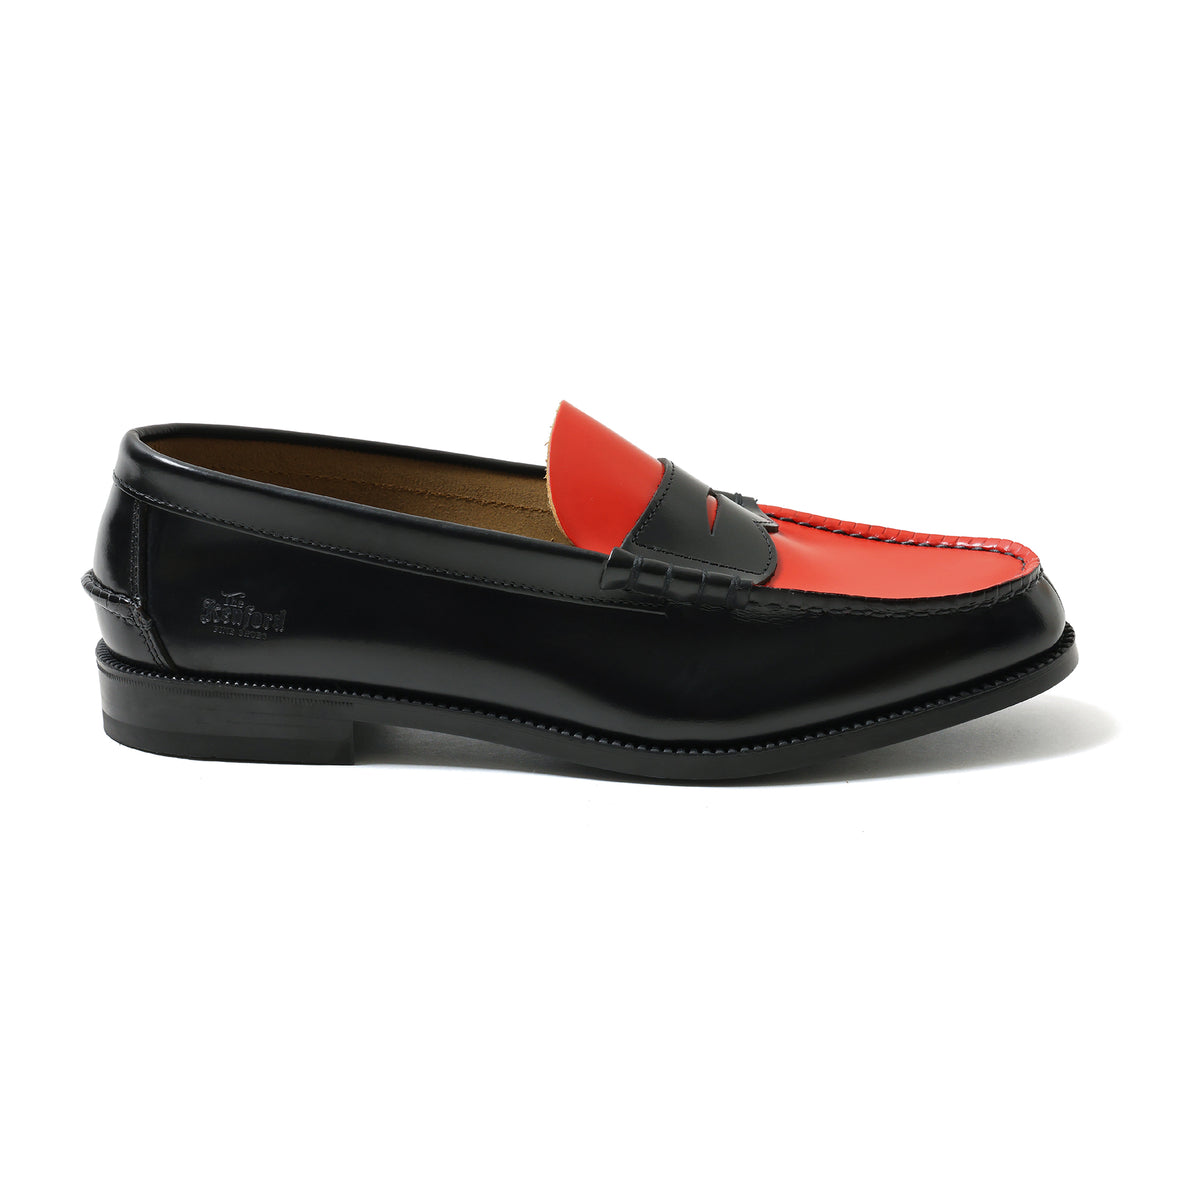 THE KENFORD FINESHOES Official Mail Order MENS COMBI LOAFERS/BLACK 